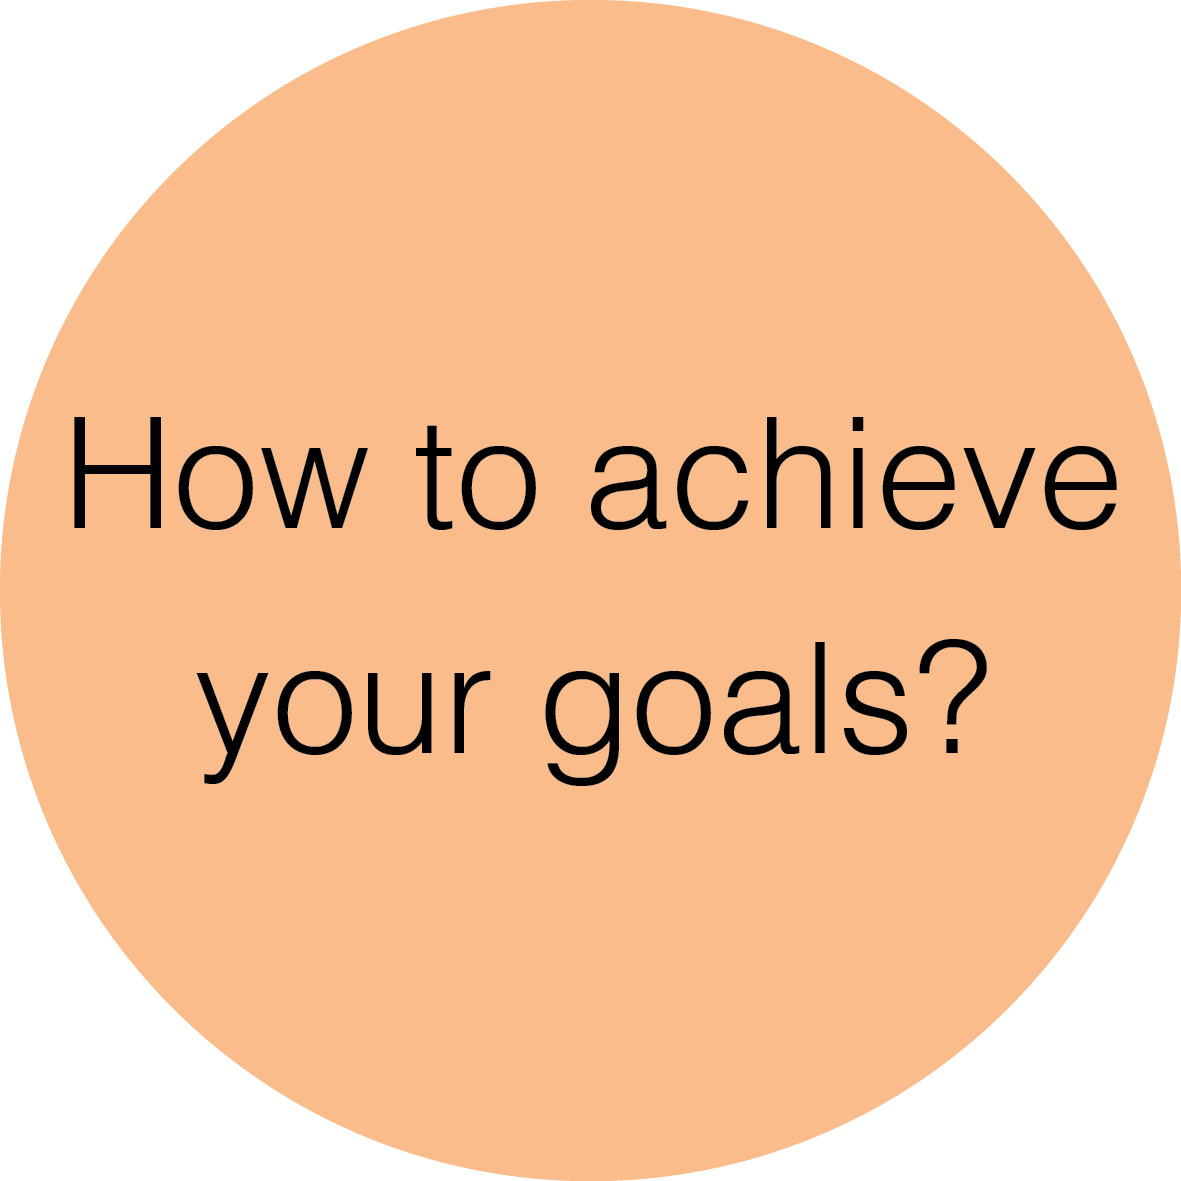 How to achieve your goals - in a circle